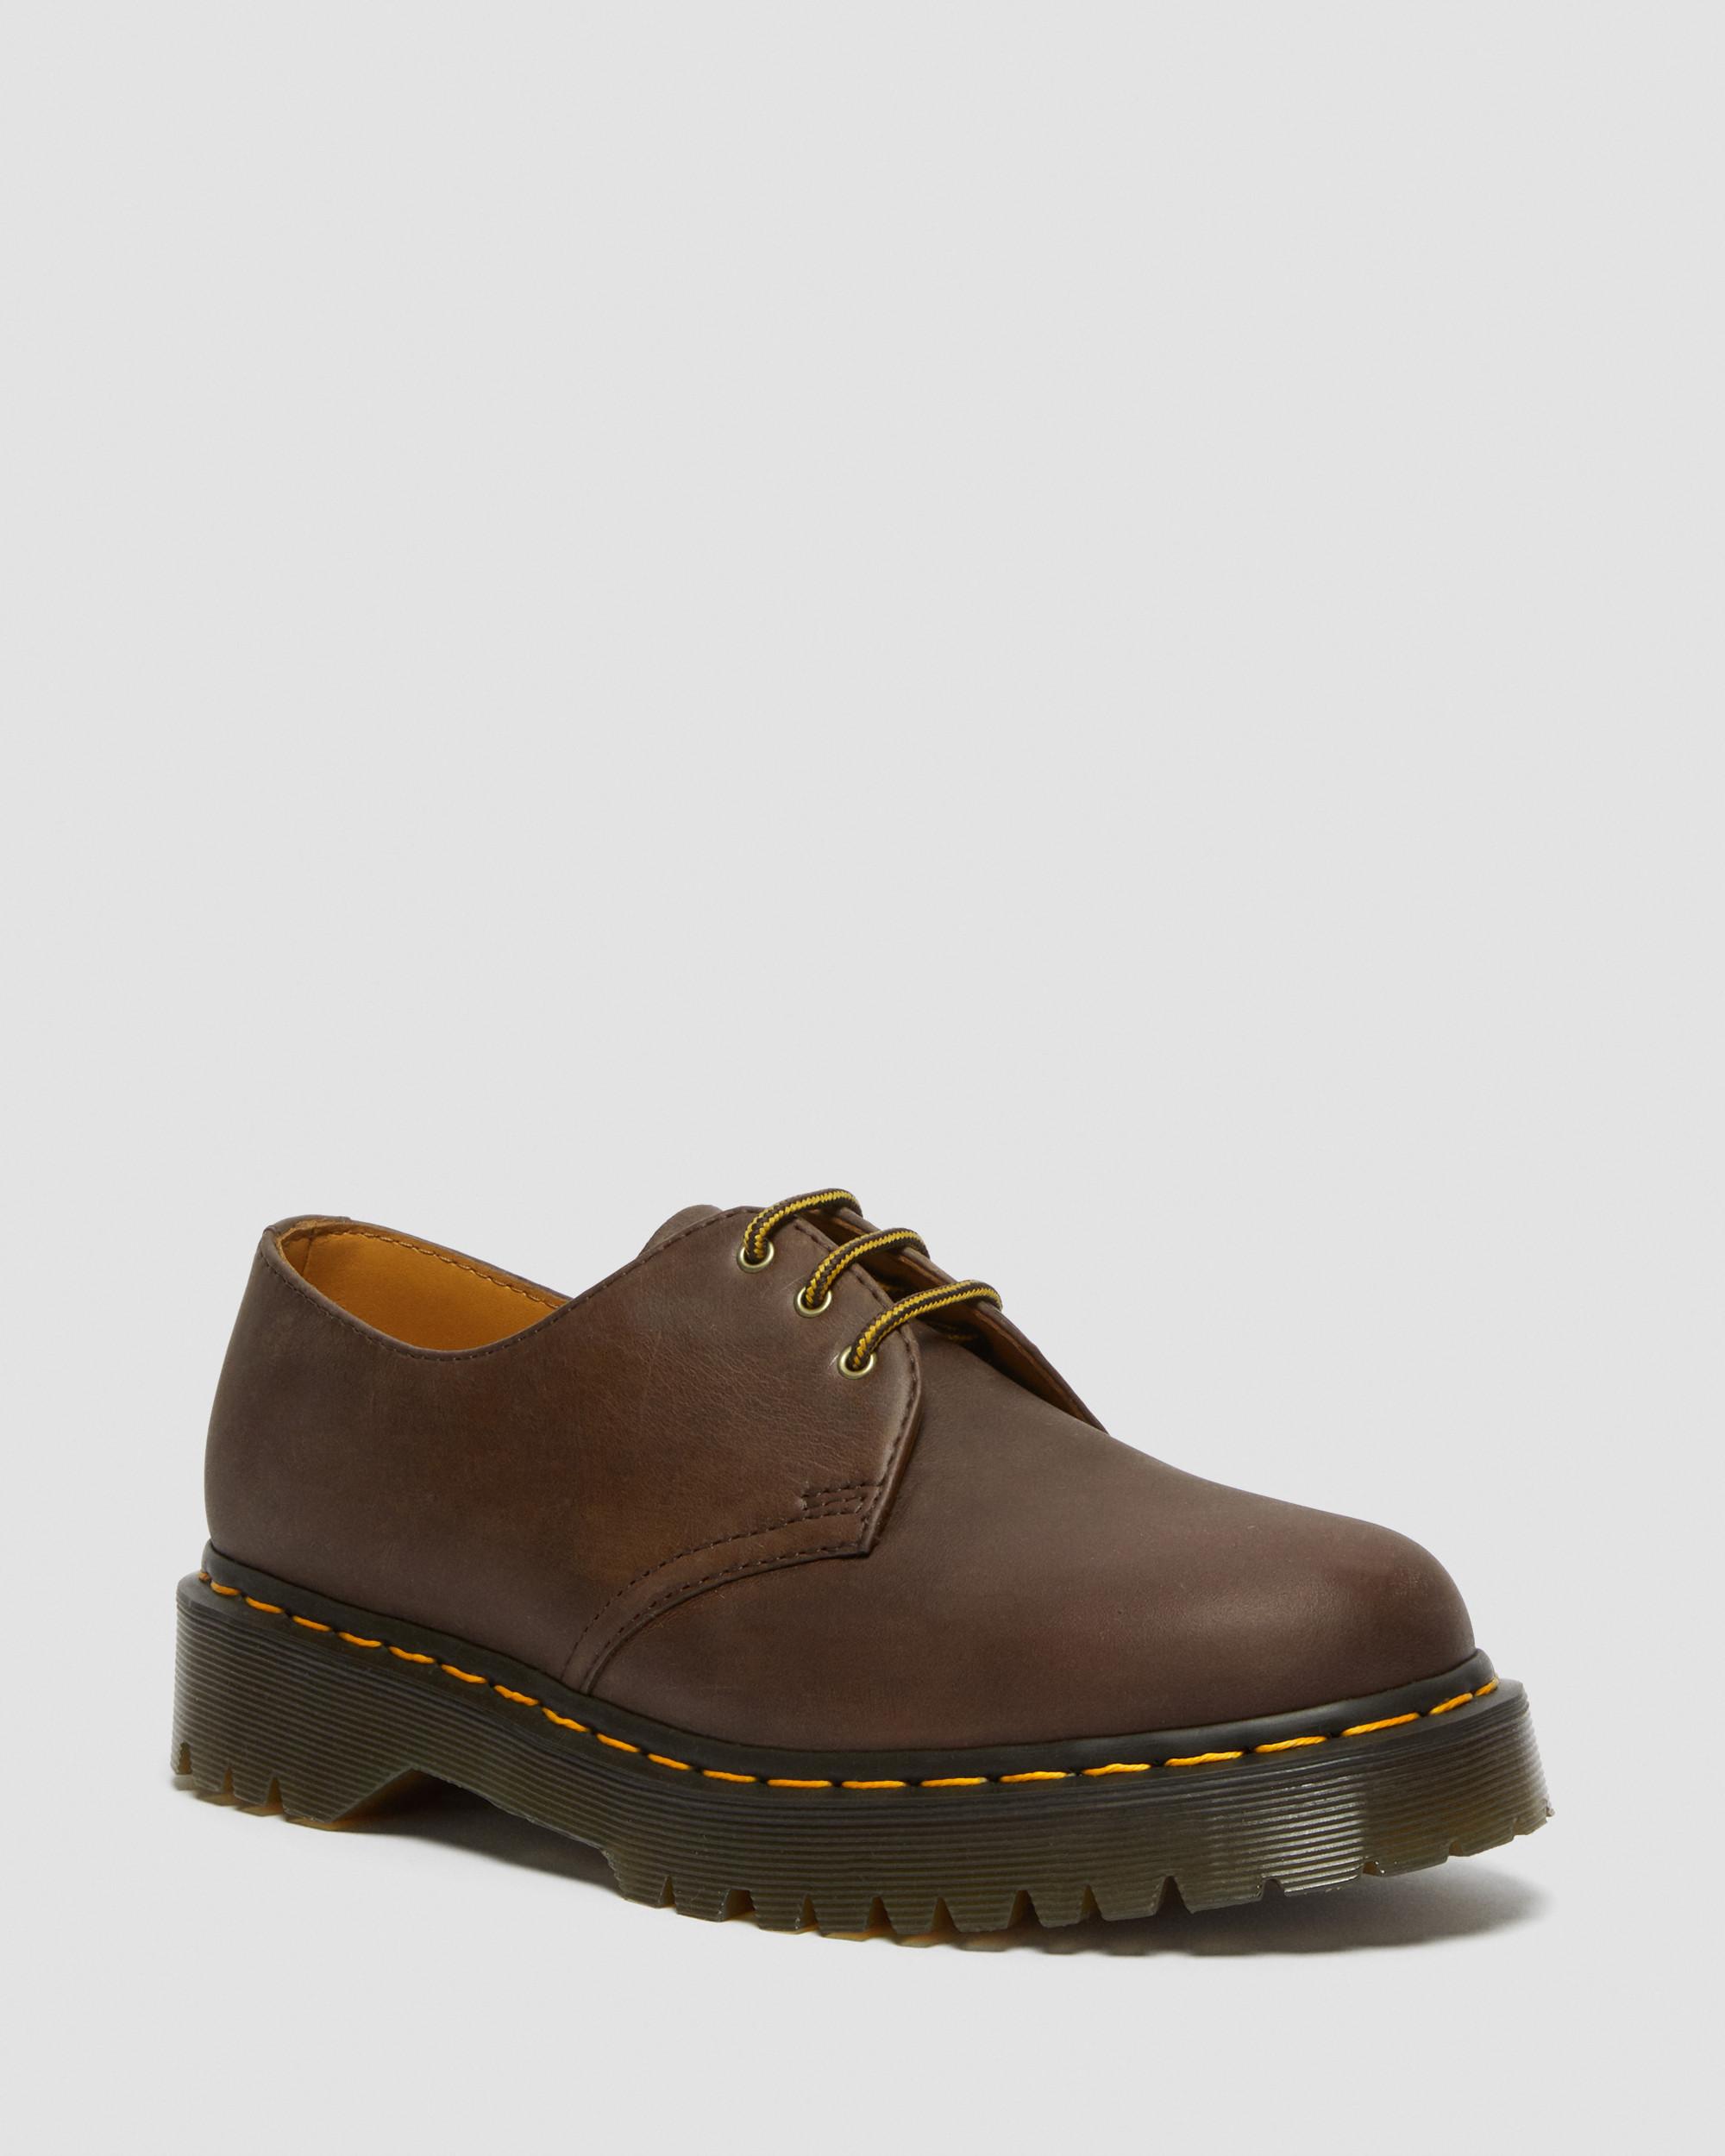 1461 Bex Crazy Horse Leather Oxford Shoes